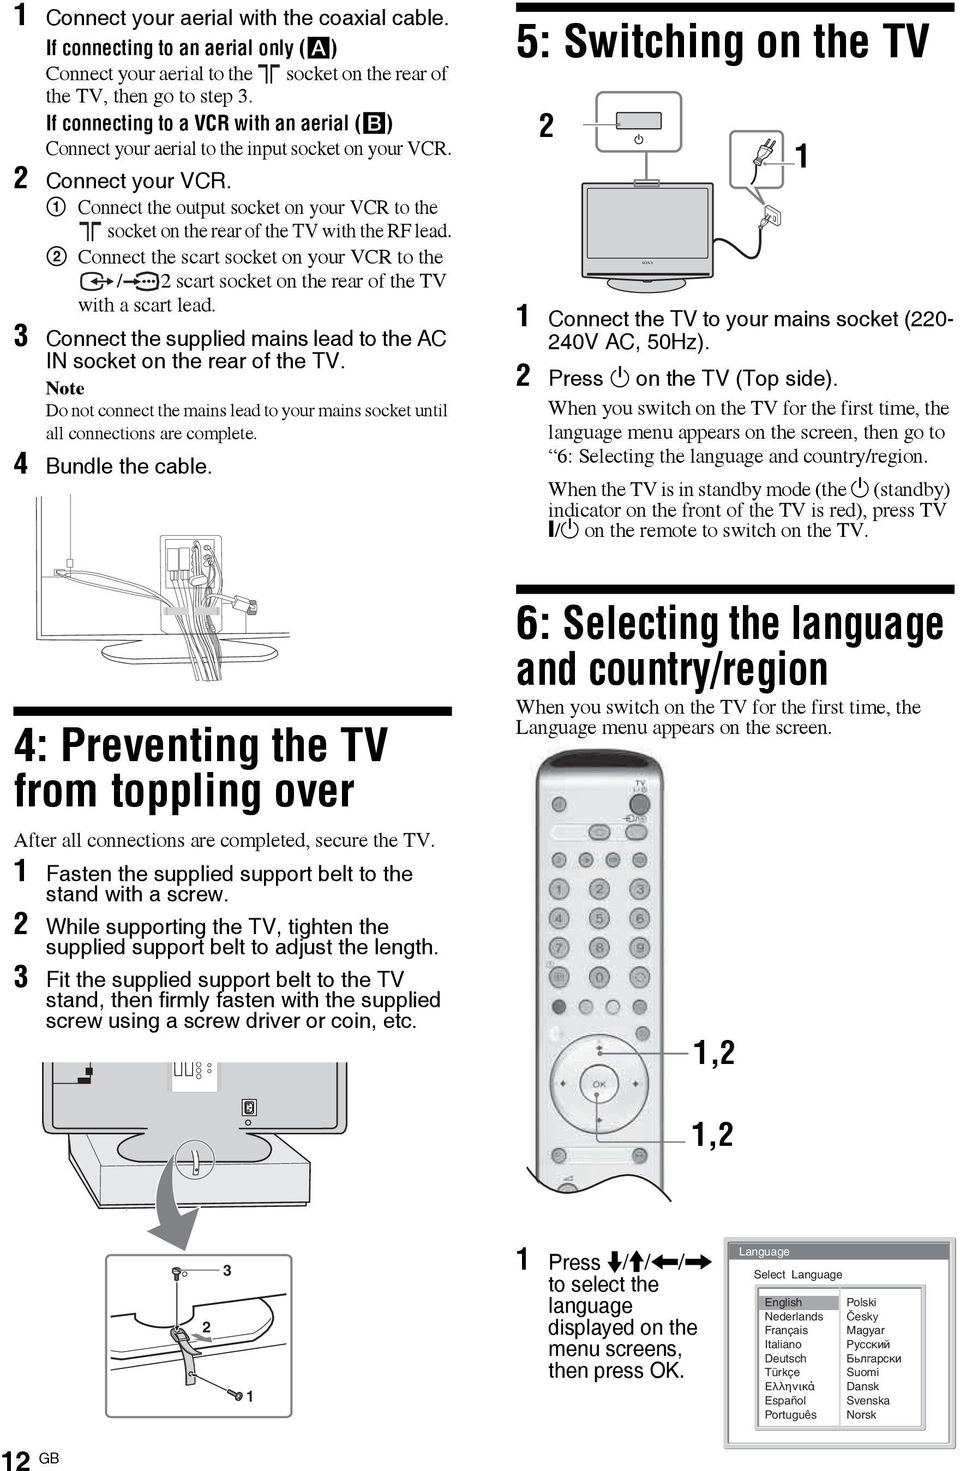 1 Connect the output socket on your VCR to the socket on the rear of the TV with the RF lead. 2 Connect the scart socket on your VCR to the / 2 scart socket on the rear of the TV with a scart lead.